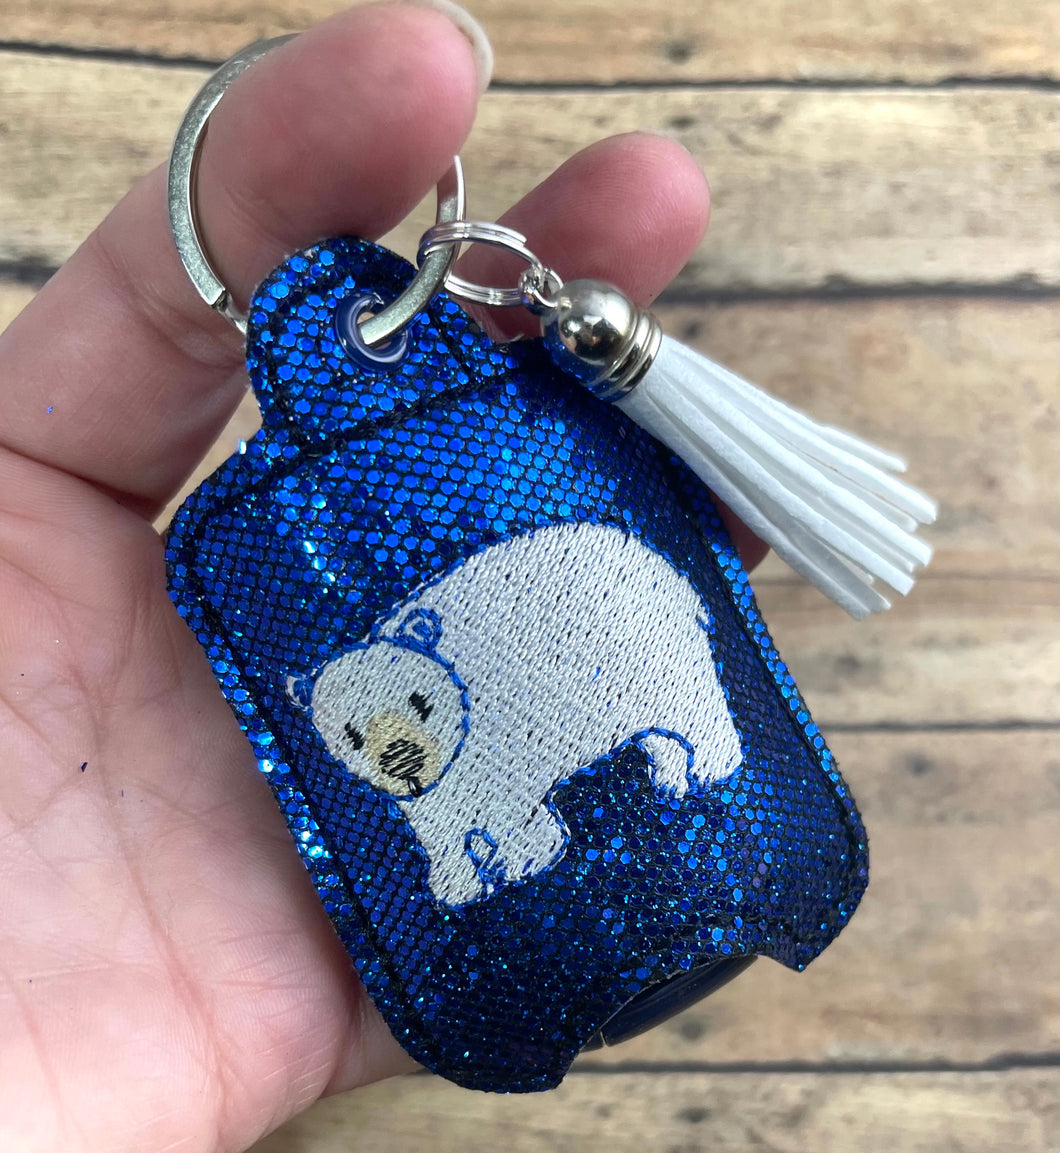 Polar Bear Hand Sanitizer Holder Eyelet Version In the Hoop Embroidery Project 1 oz BBW for 4x4 hoops